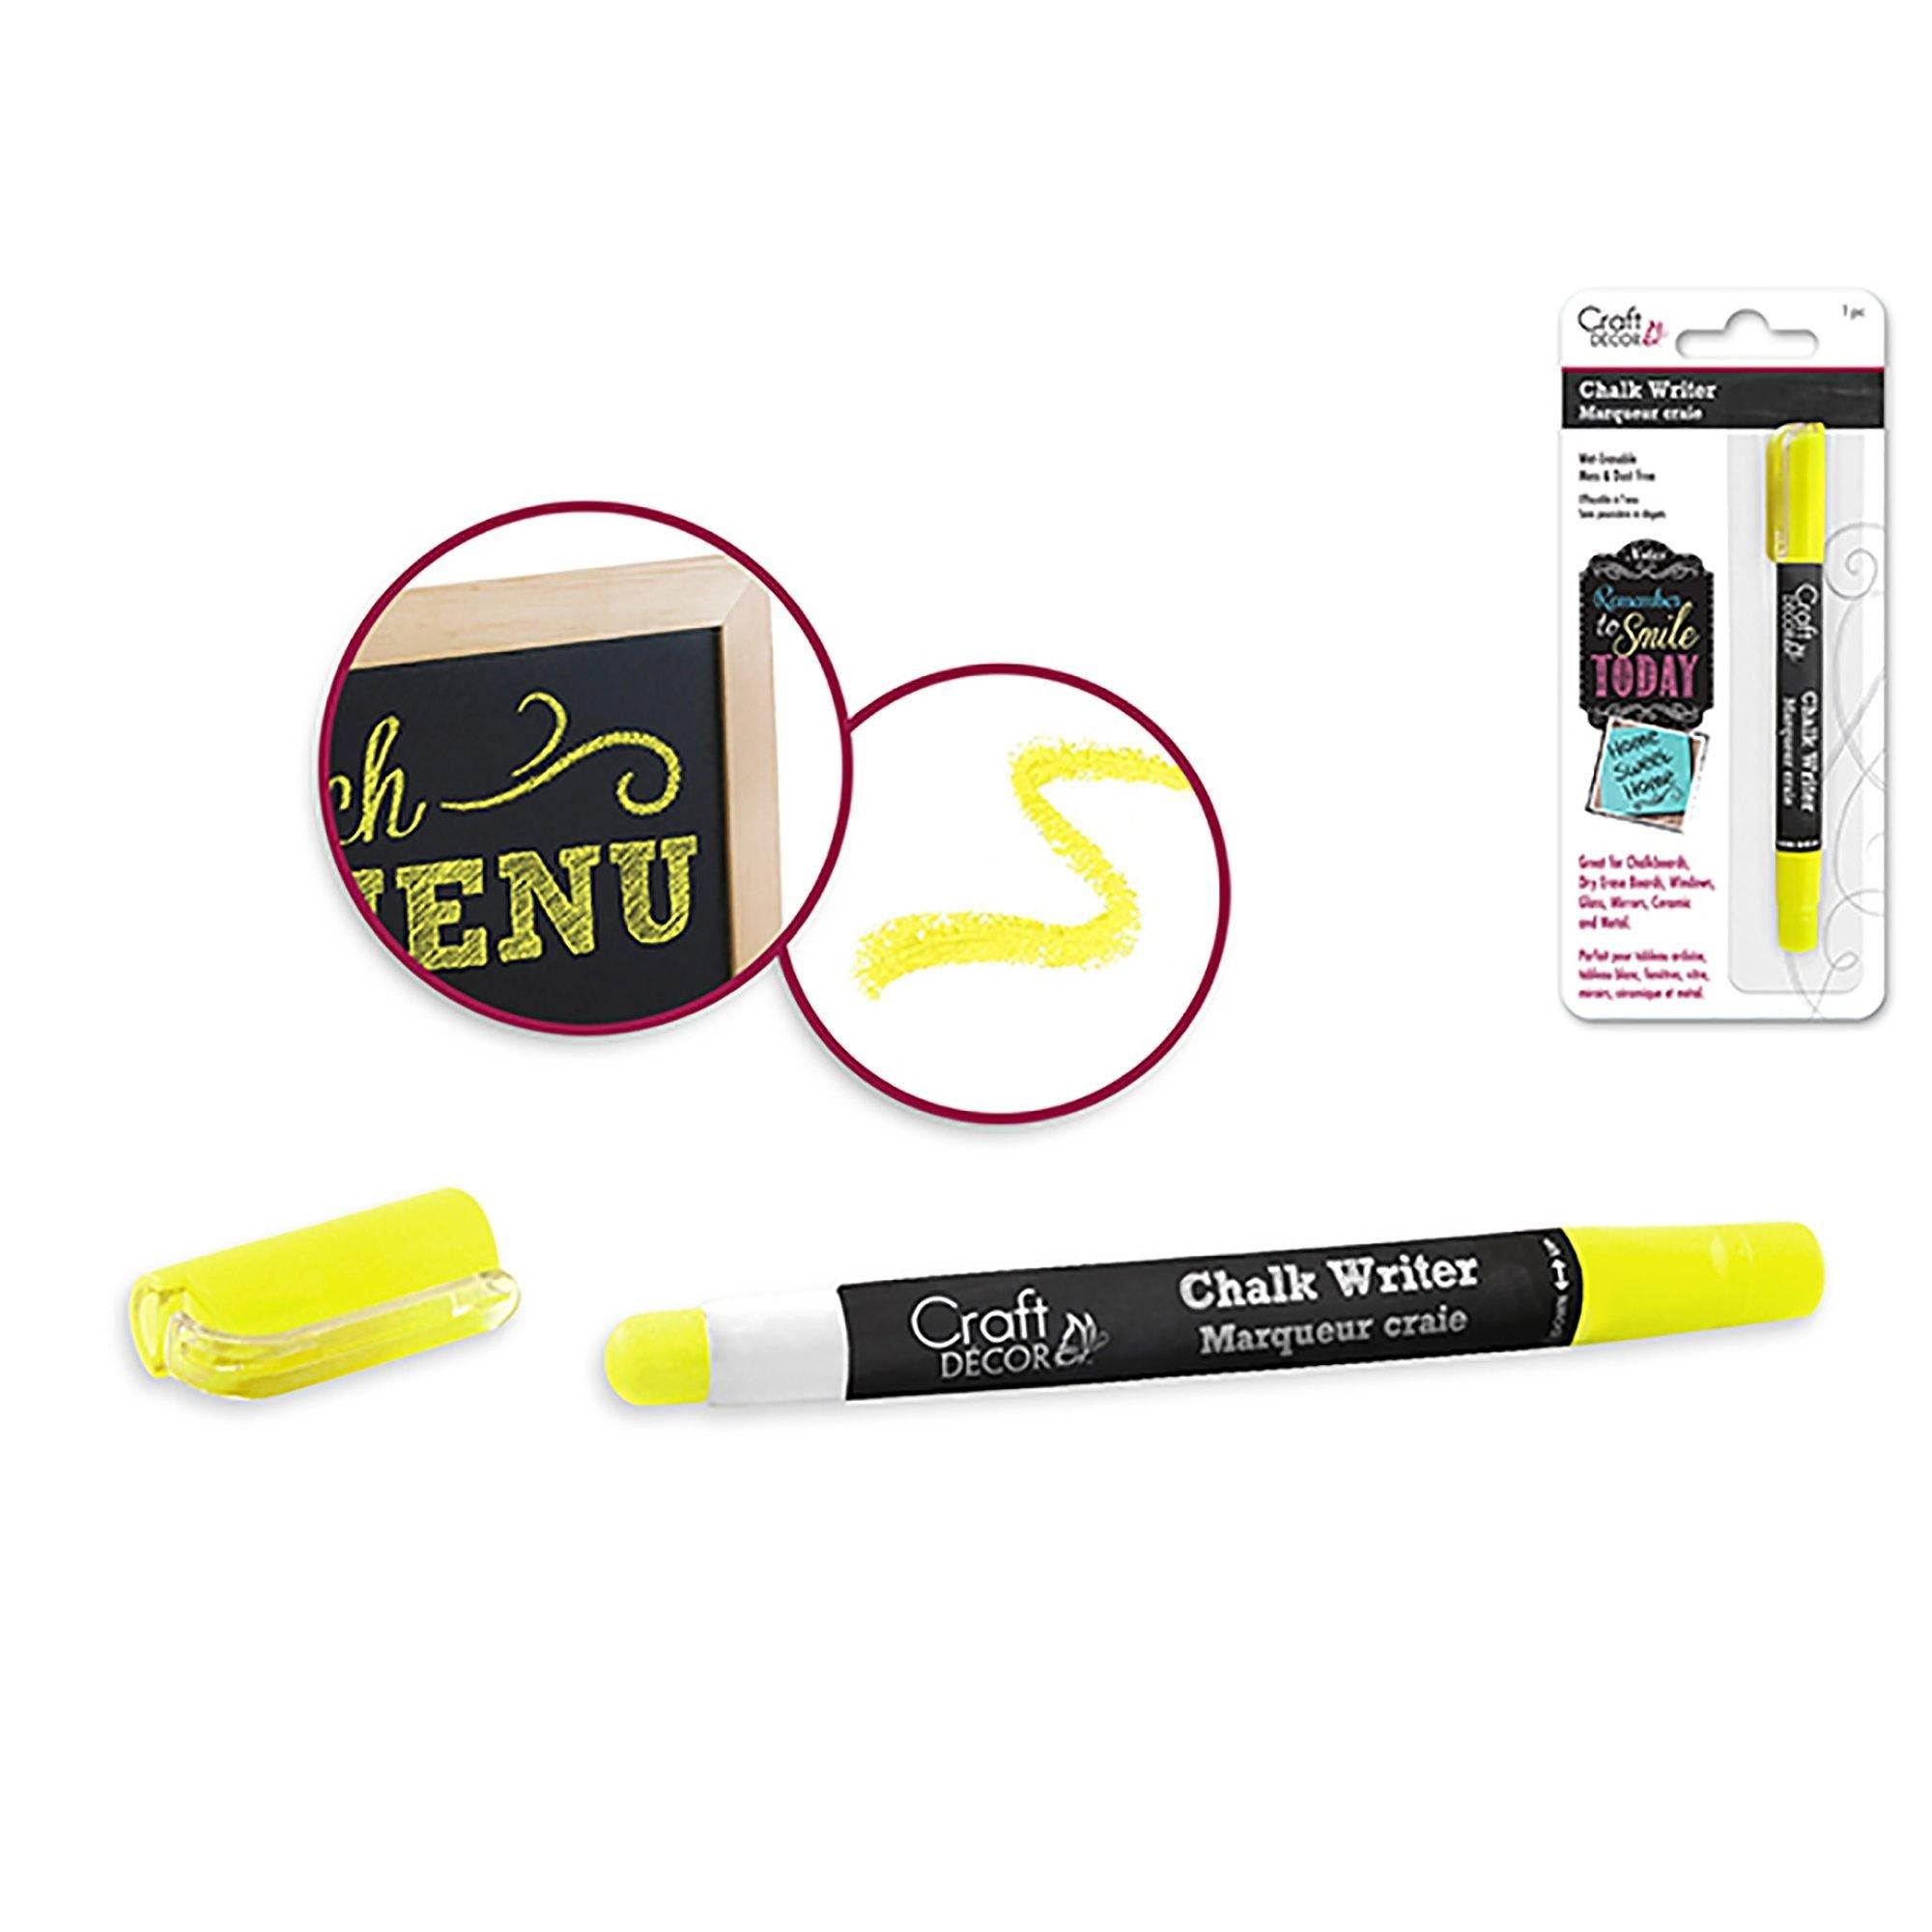 Neon Yellow Craft Decor: Chalk Writer Blister-Carded - Dollar Max Dépôt